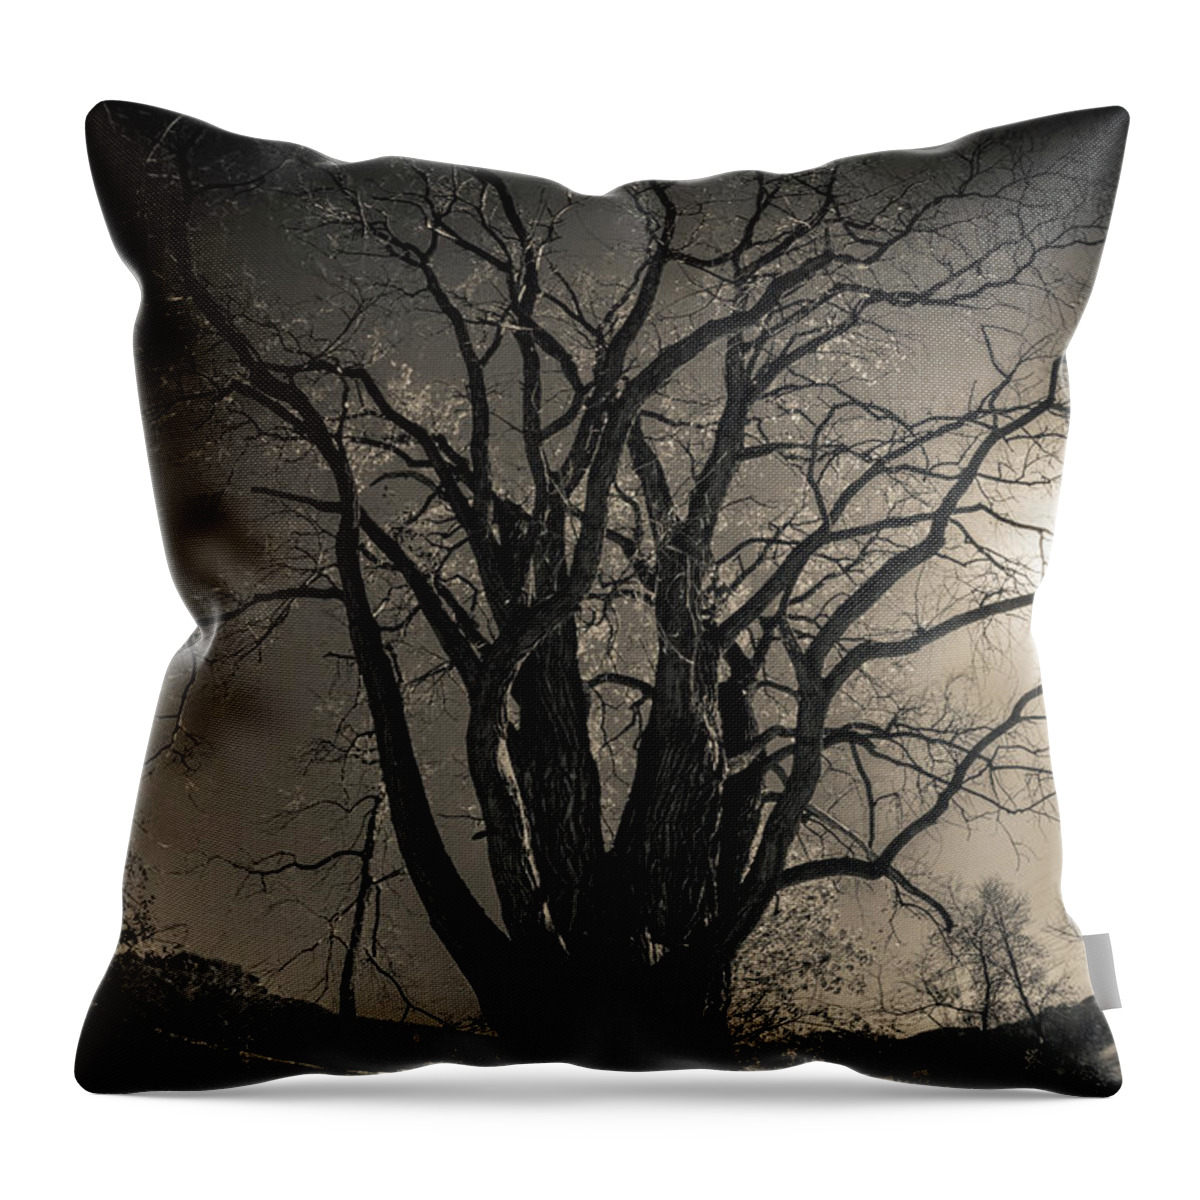 Night Throw Pillow featuring the photograph Midnight Dreary by Phil S Addis